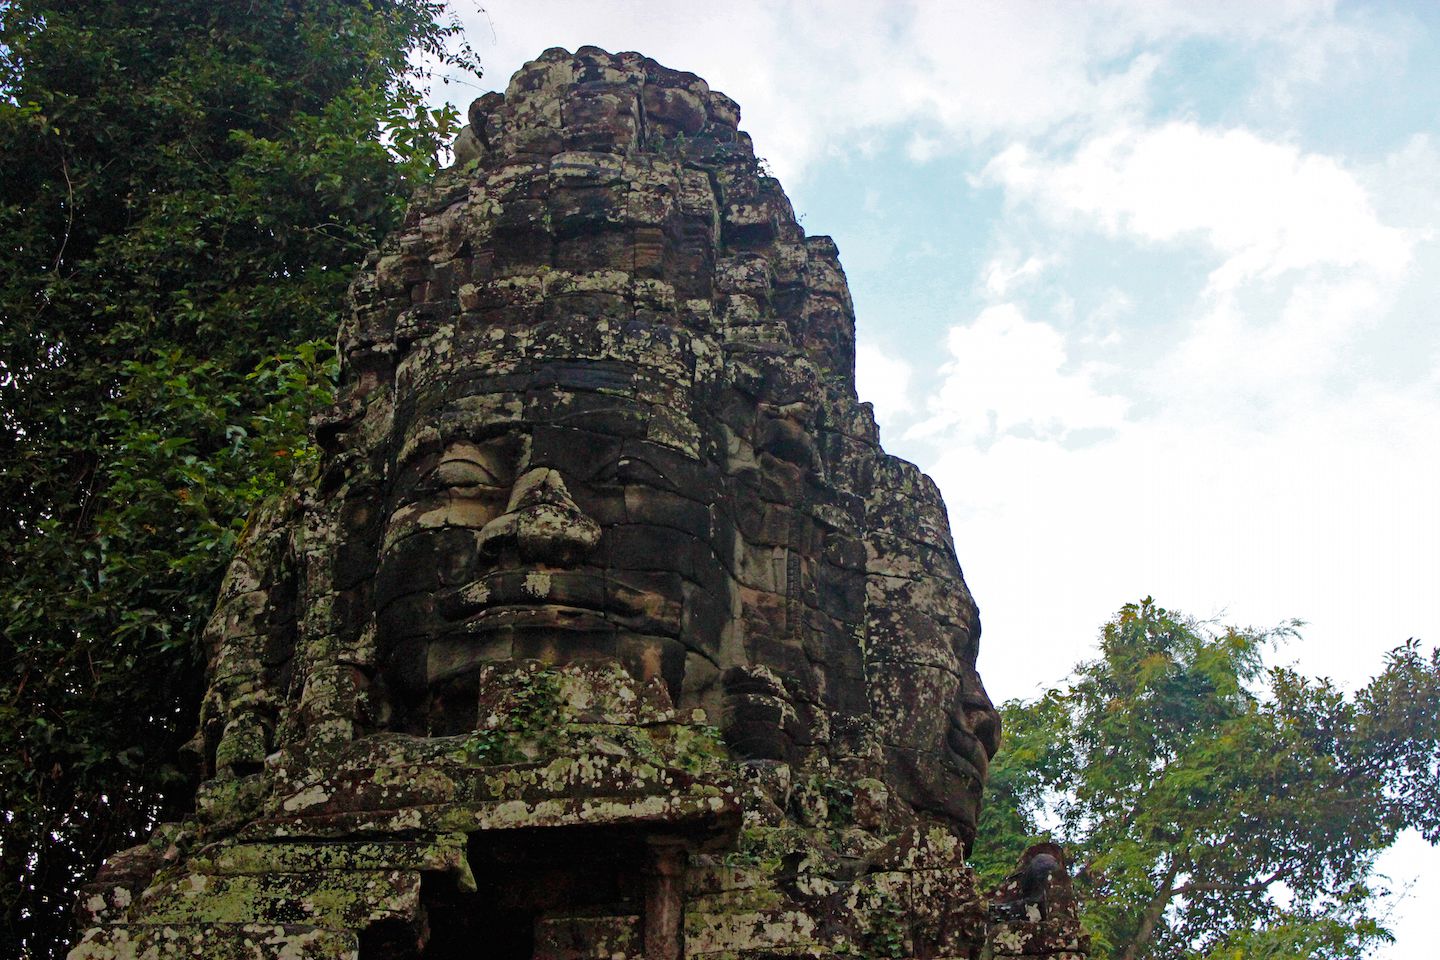 Face towers of Banteay Kdei